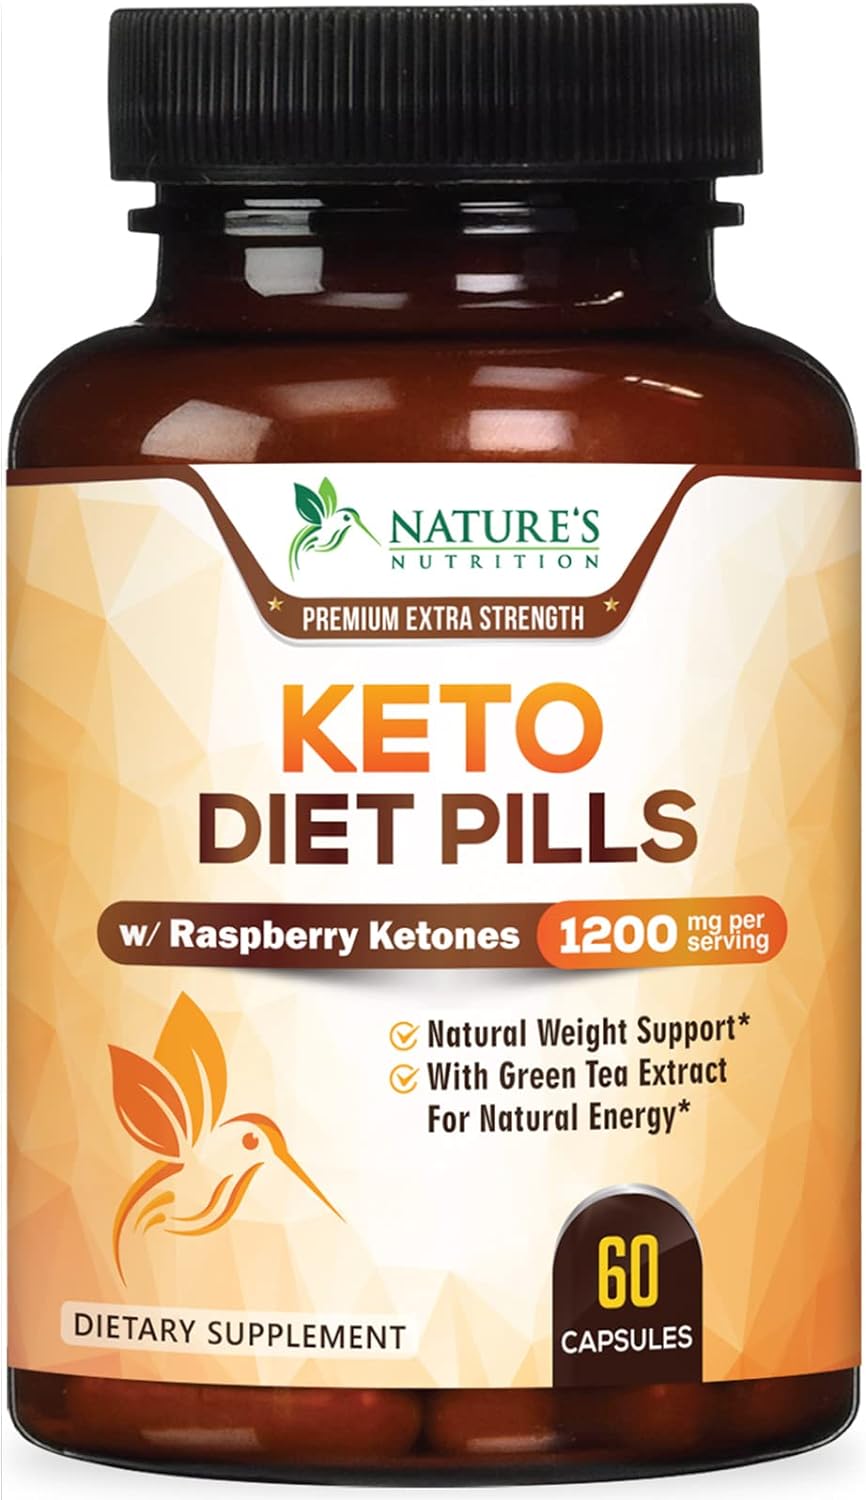 Keto Pills 1200mg - Advanced Support Lean Keto Diet Pills - Use Fat for Energy  Focus in Ketosis - Ultra Fast Prime Keto Supplement for Women  Men - Natures Optimal Max Keto - 60 Capsules